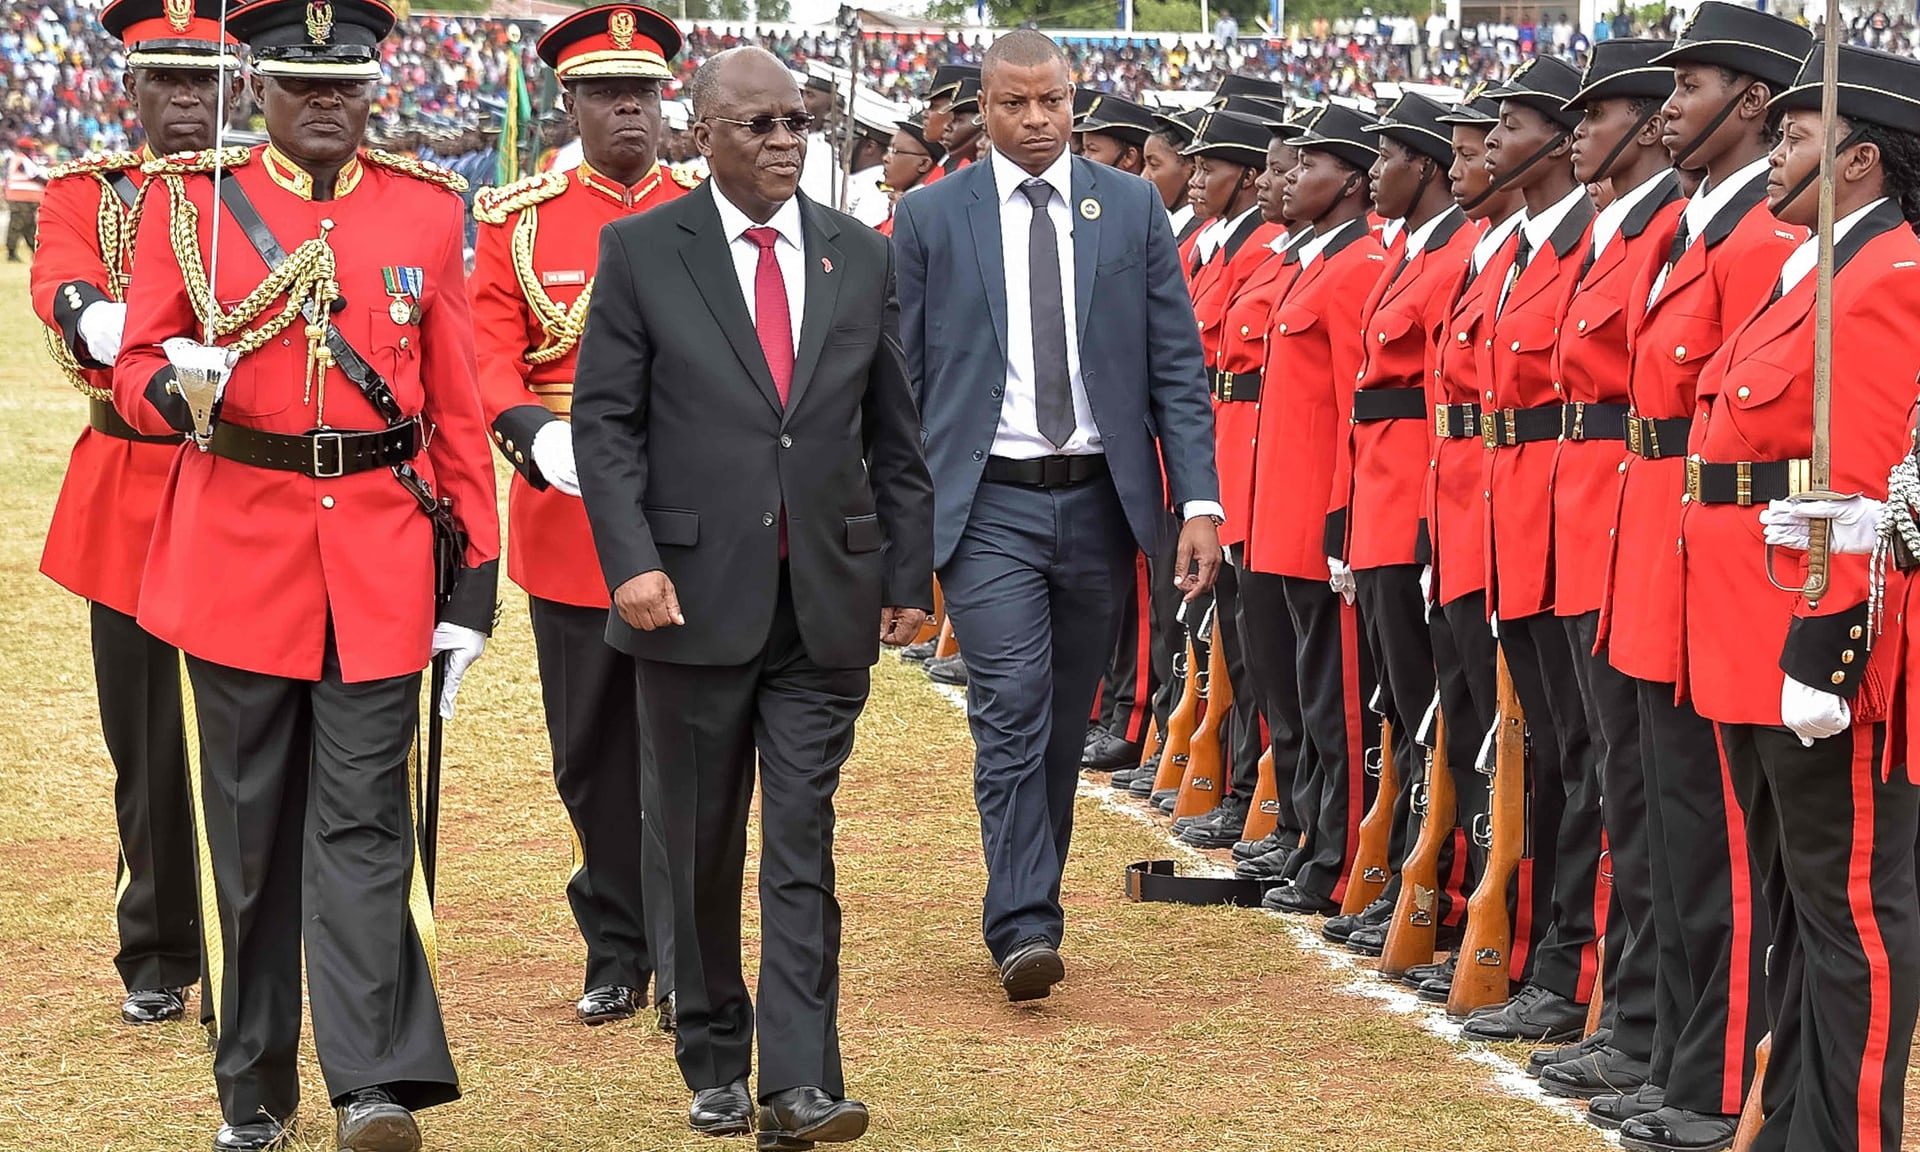 Tanzanian President John Magufuli (centre) in Dodoma. He pardoned the two convicted rapists along with thousands of other prisoners in his independence day speech on Saturday.